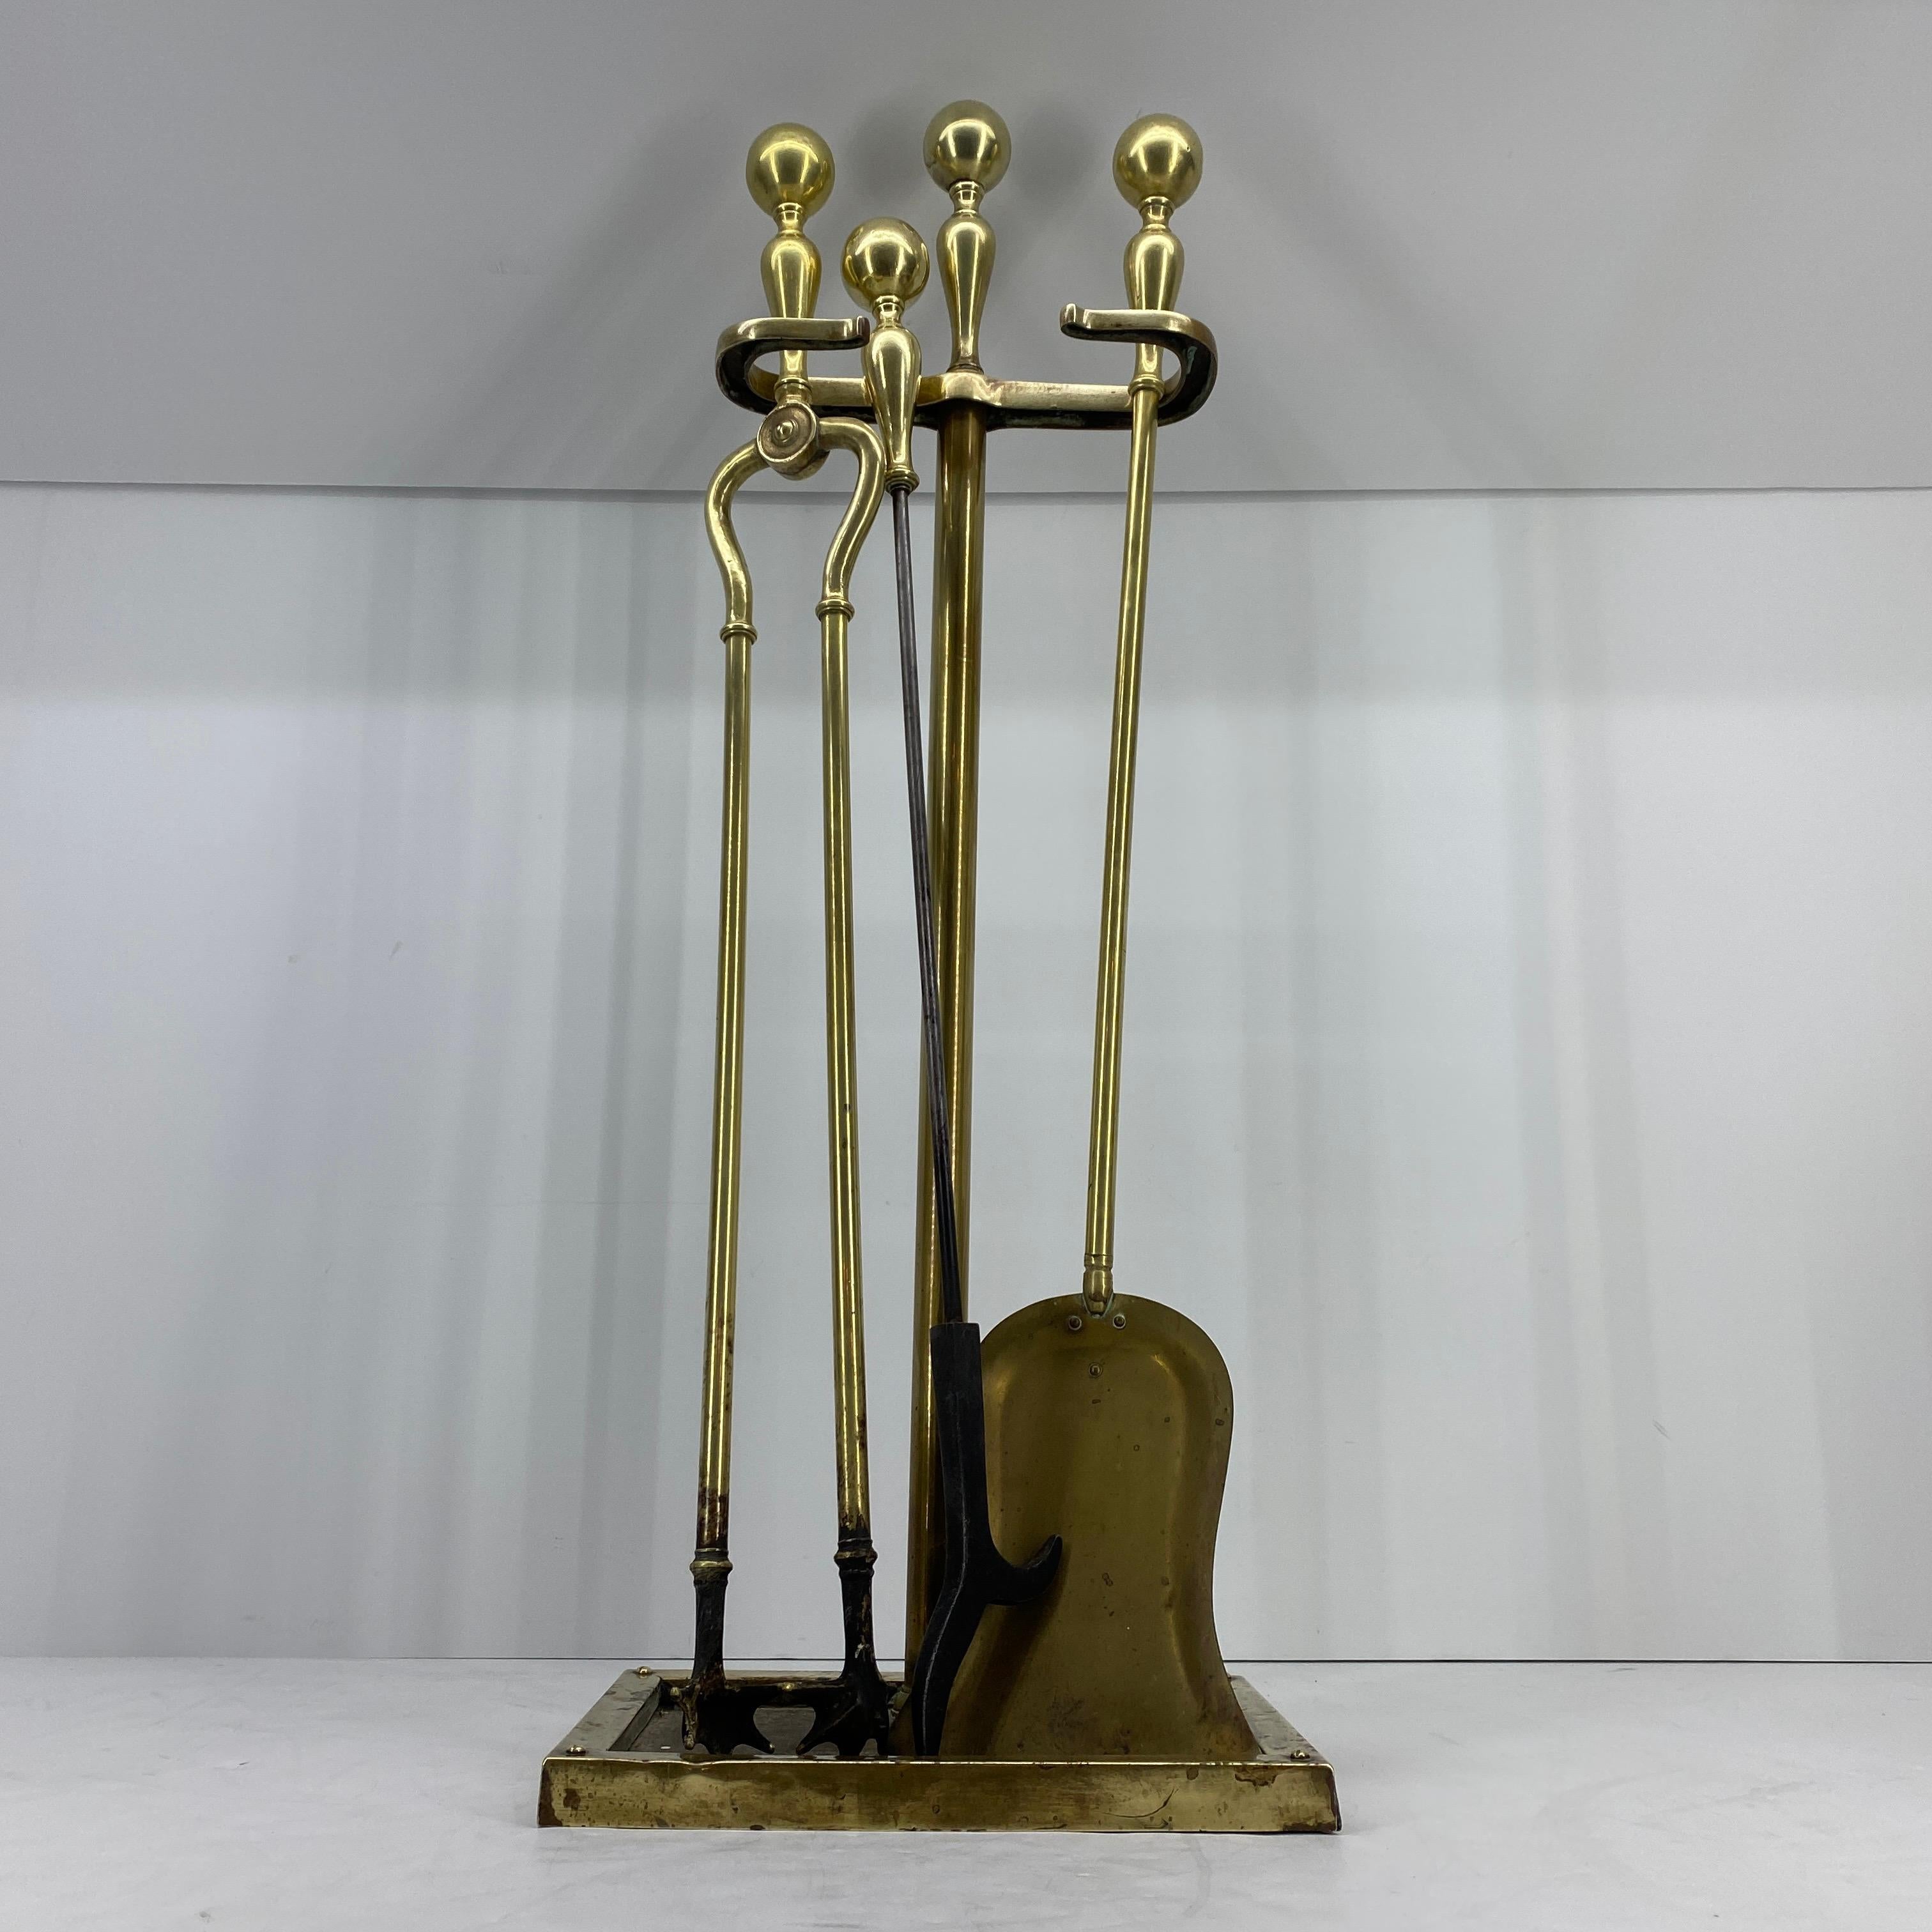 Danish 3-piece set of brass fireplace tools and stand, late 19th century.